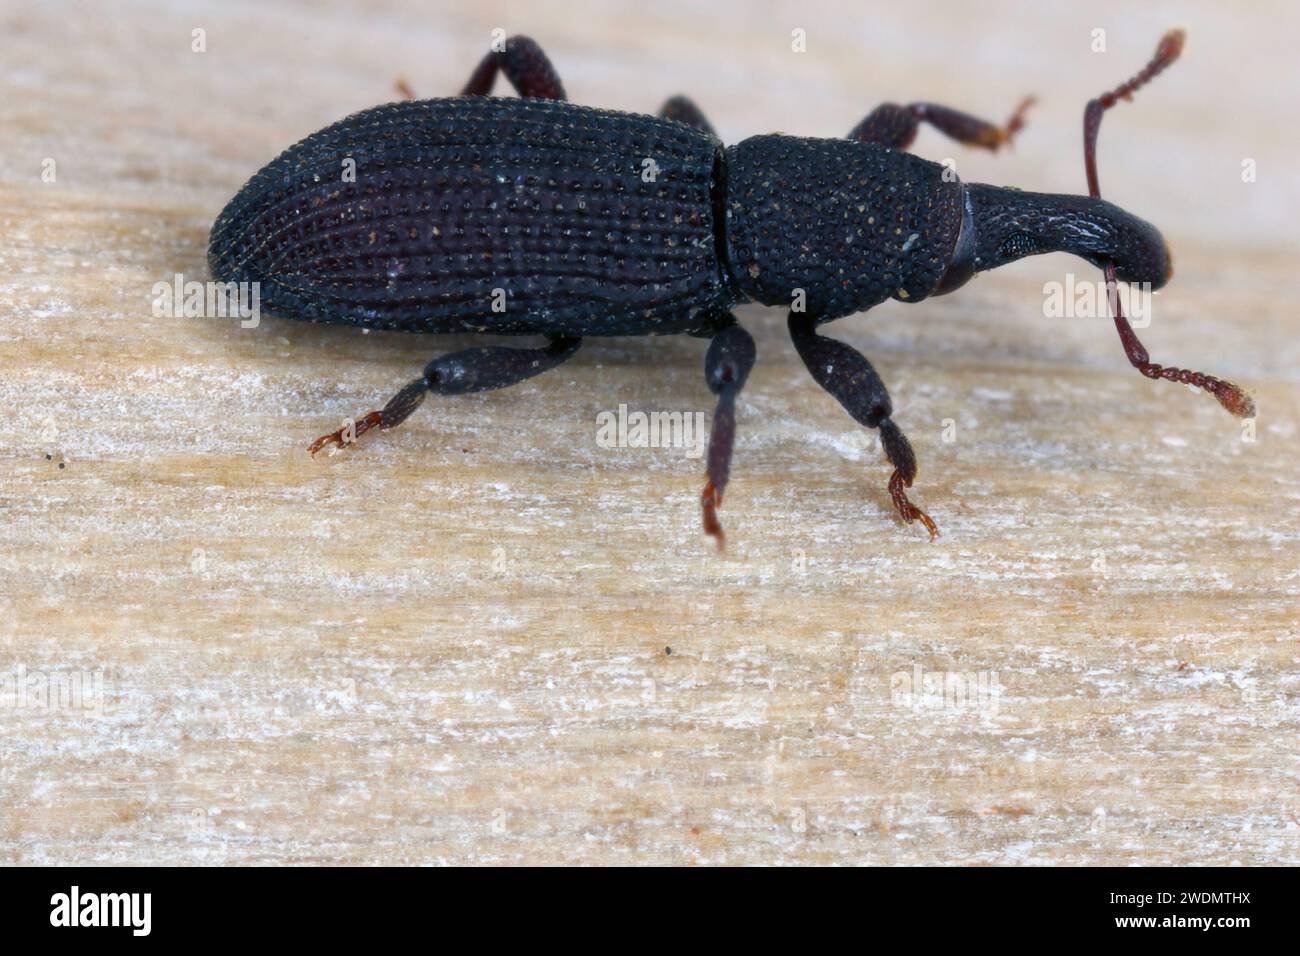 A beetle (snout beetles or true weevils, Curculionidae, Cossoninae, Dryotribus)  observed under the bark of a tree on the island of Mauritius. Stock Photo